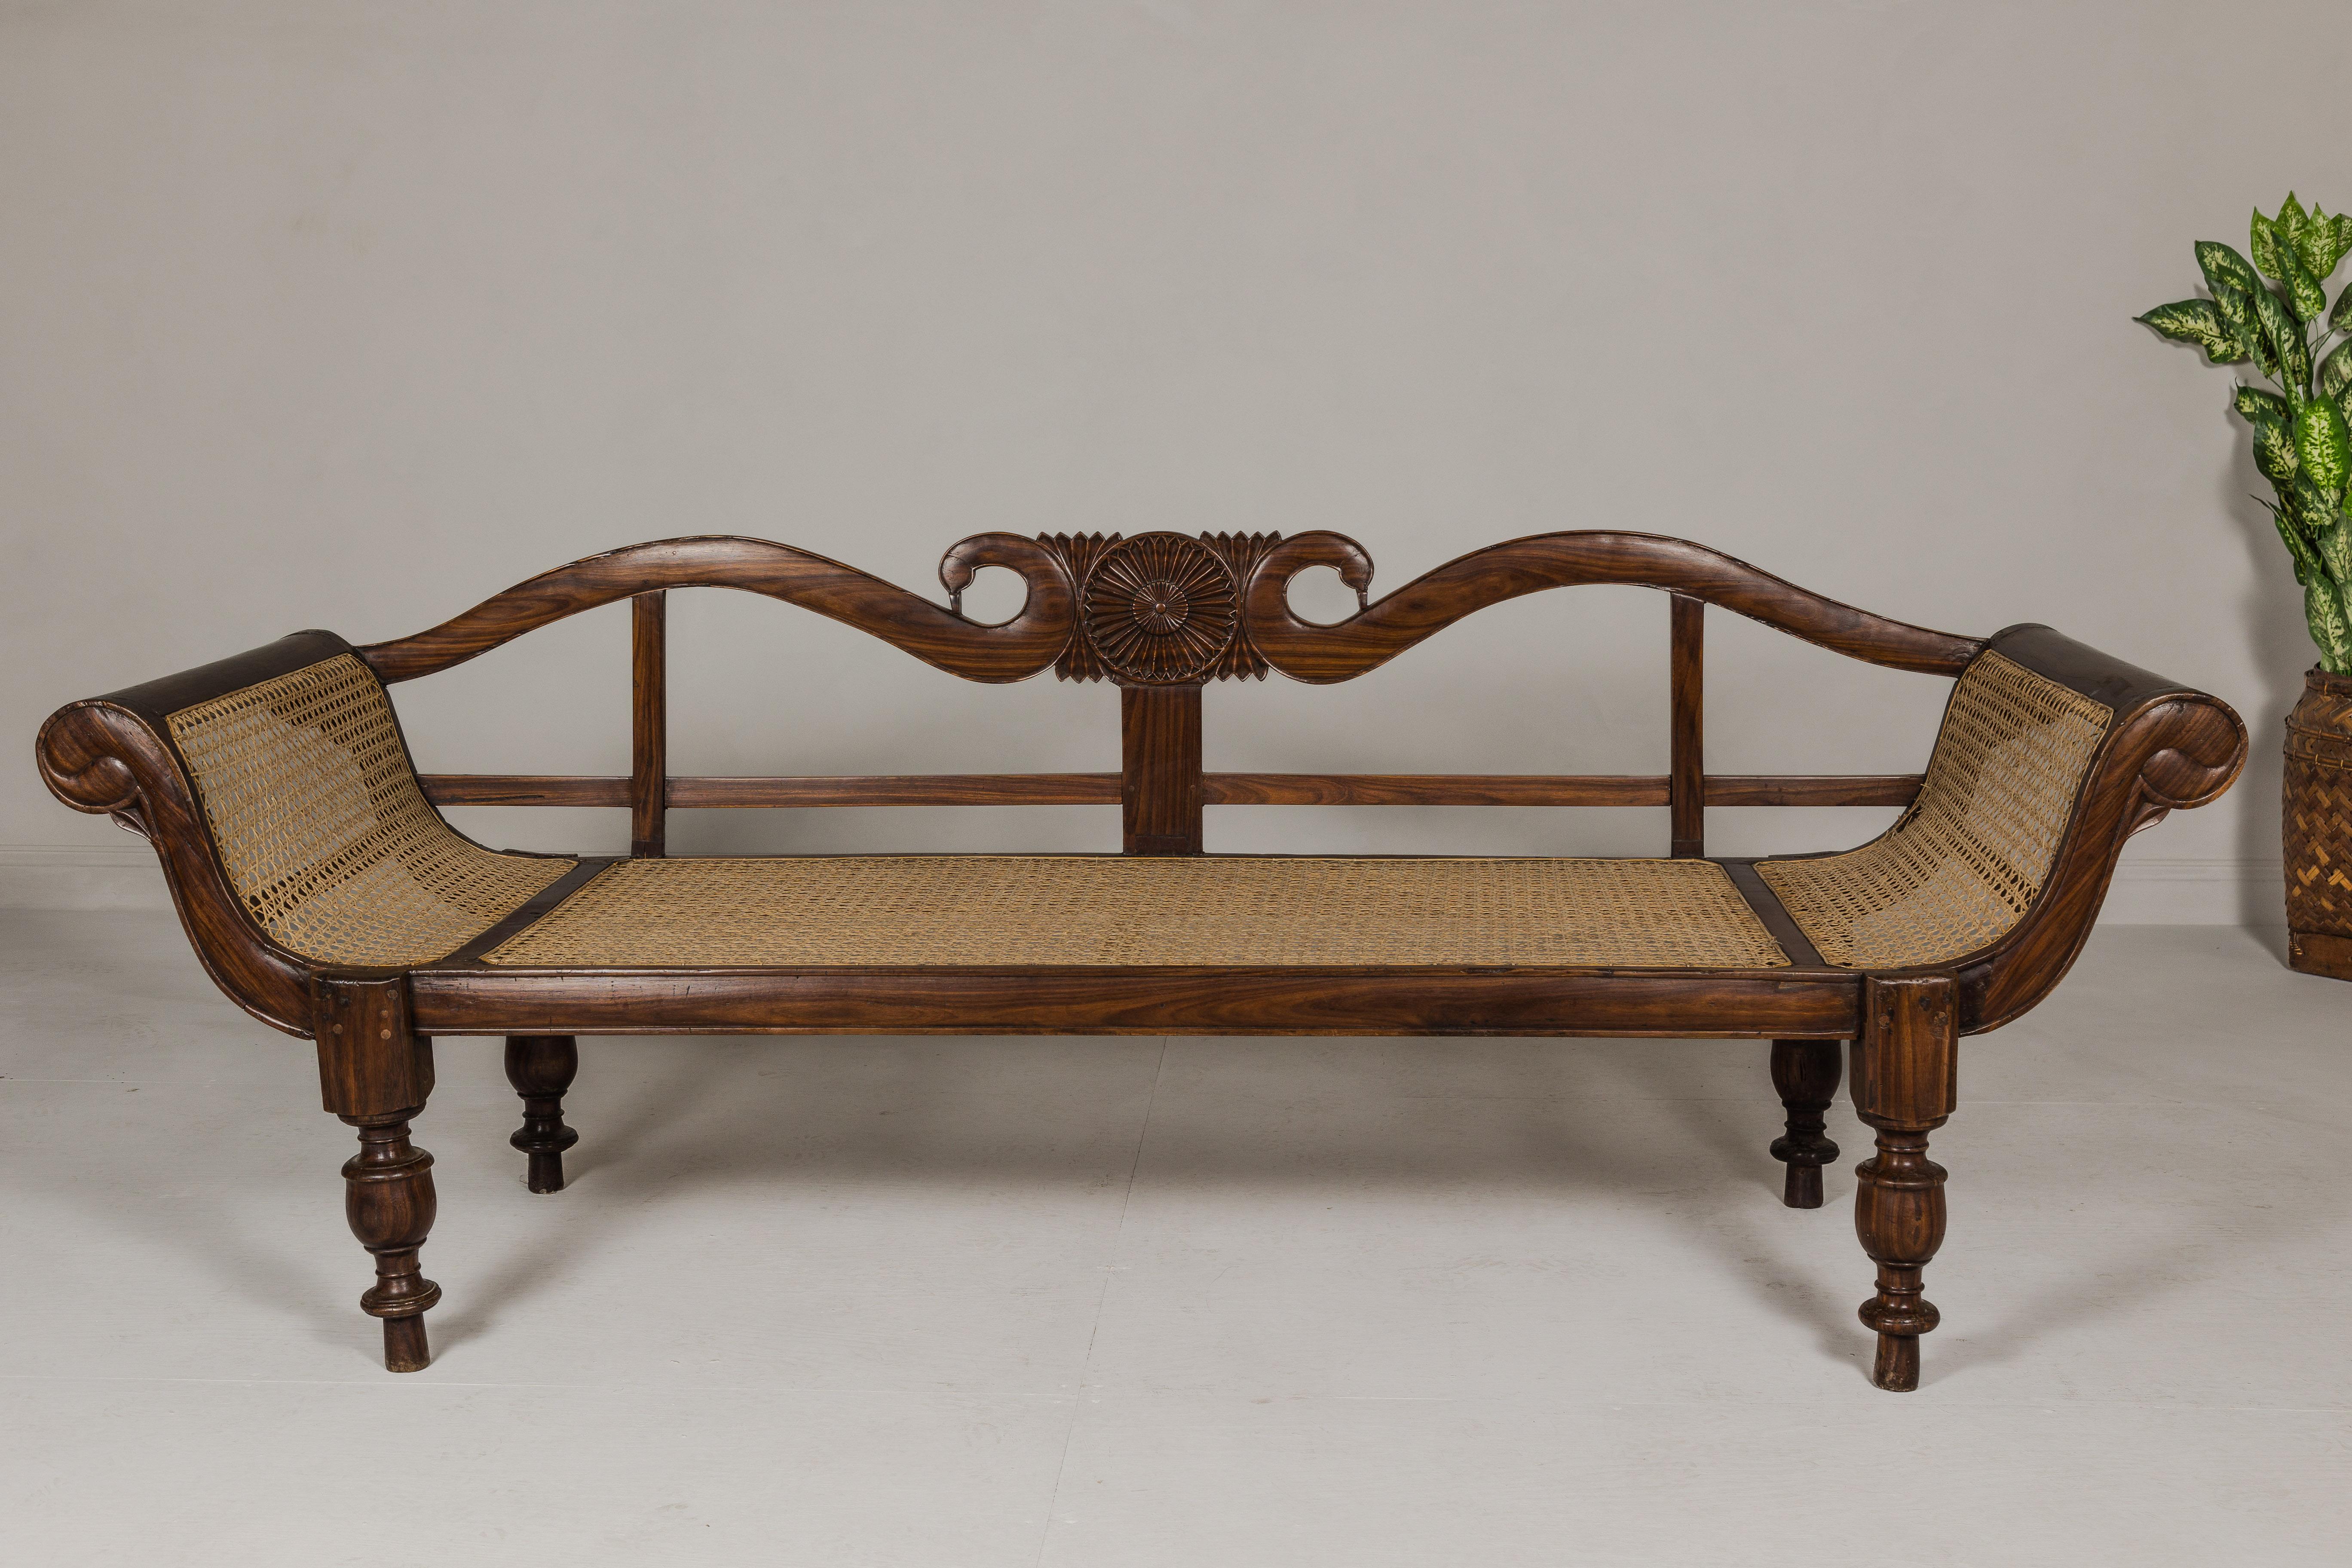 A British Colonial carved wooden settee with swan neck back and out-scrolling arms, cane seat and turned legs. This British Colonial carved wooden settee, originating from antique South-East Asia, is a striking blend of elegance and colonial design